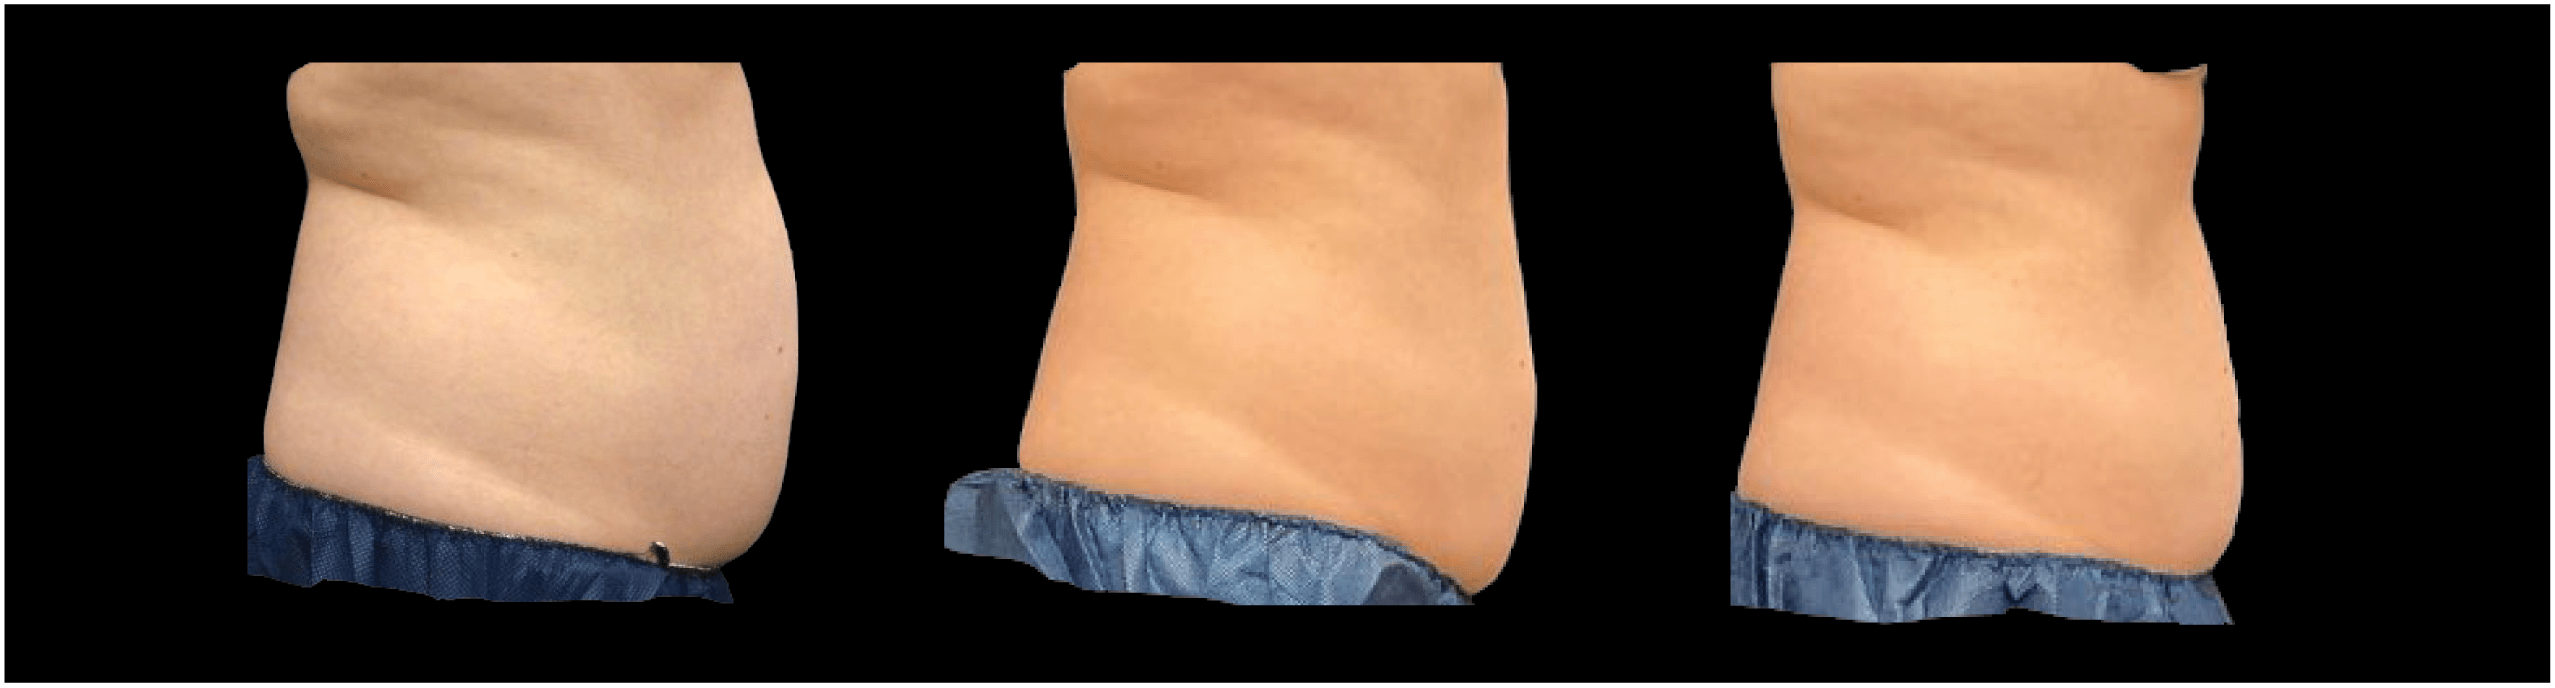 CoolSculpting Elite Before During After DJ side view